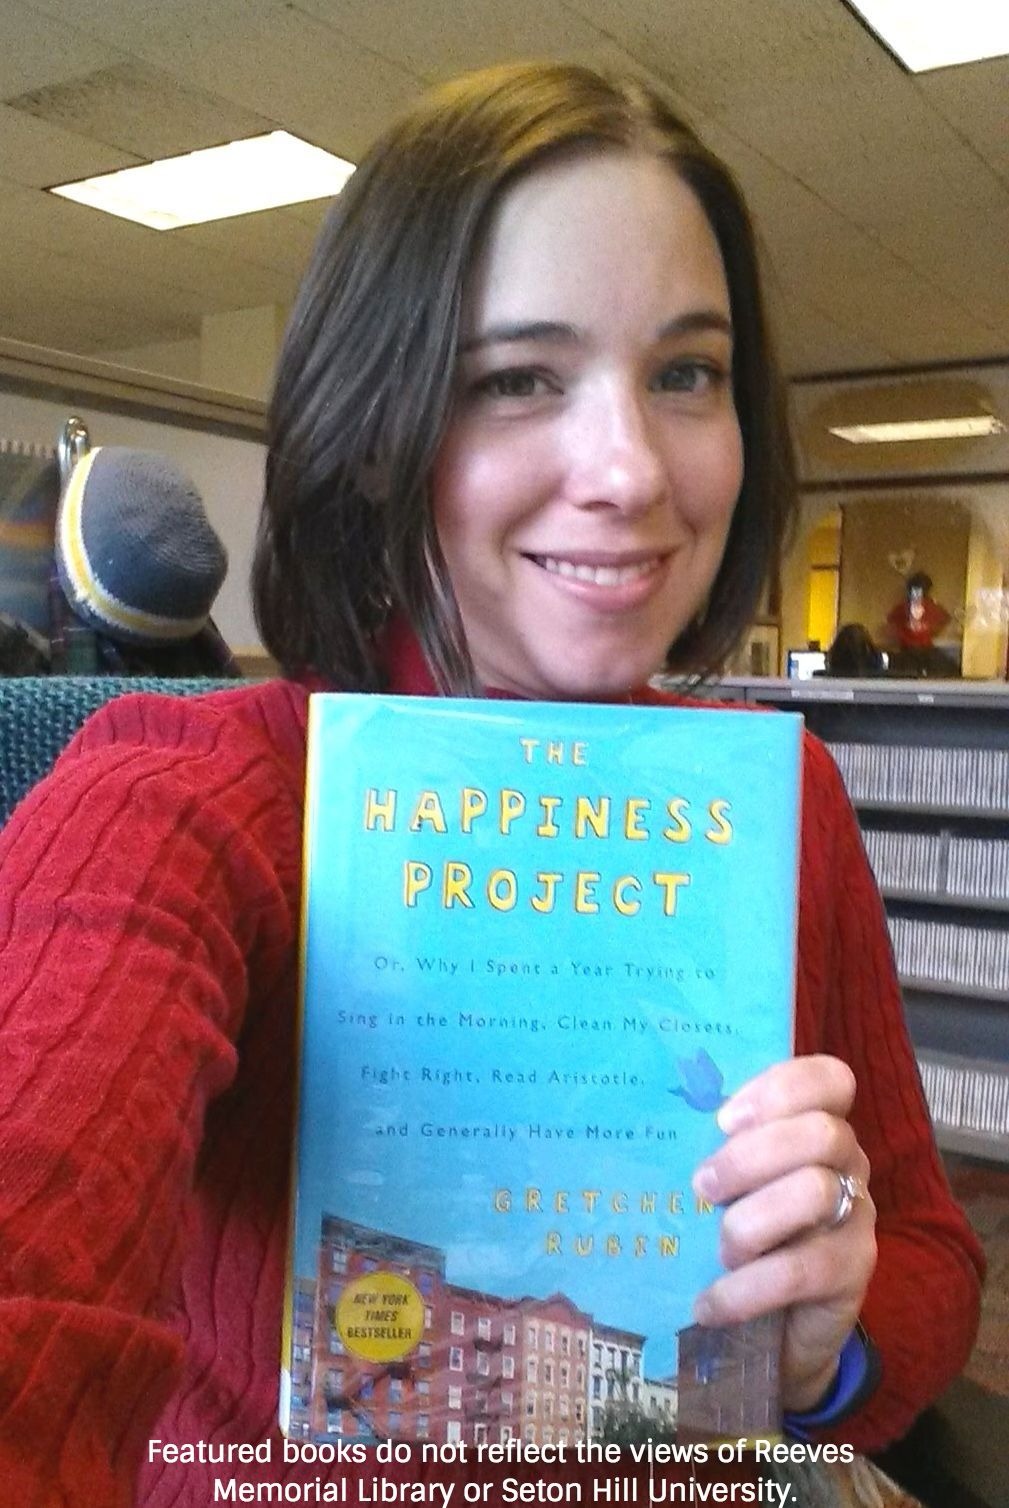 Get Book The happiness project or why i spent a year trying to sing in the morning clean my closets fight right read aristotle and generally have more fun For Free